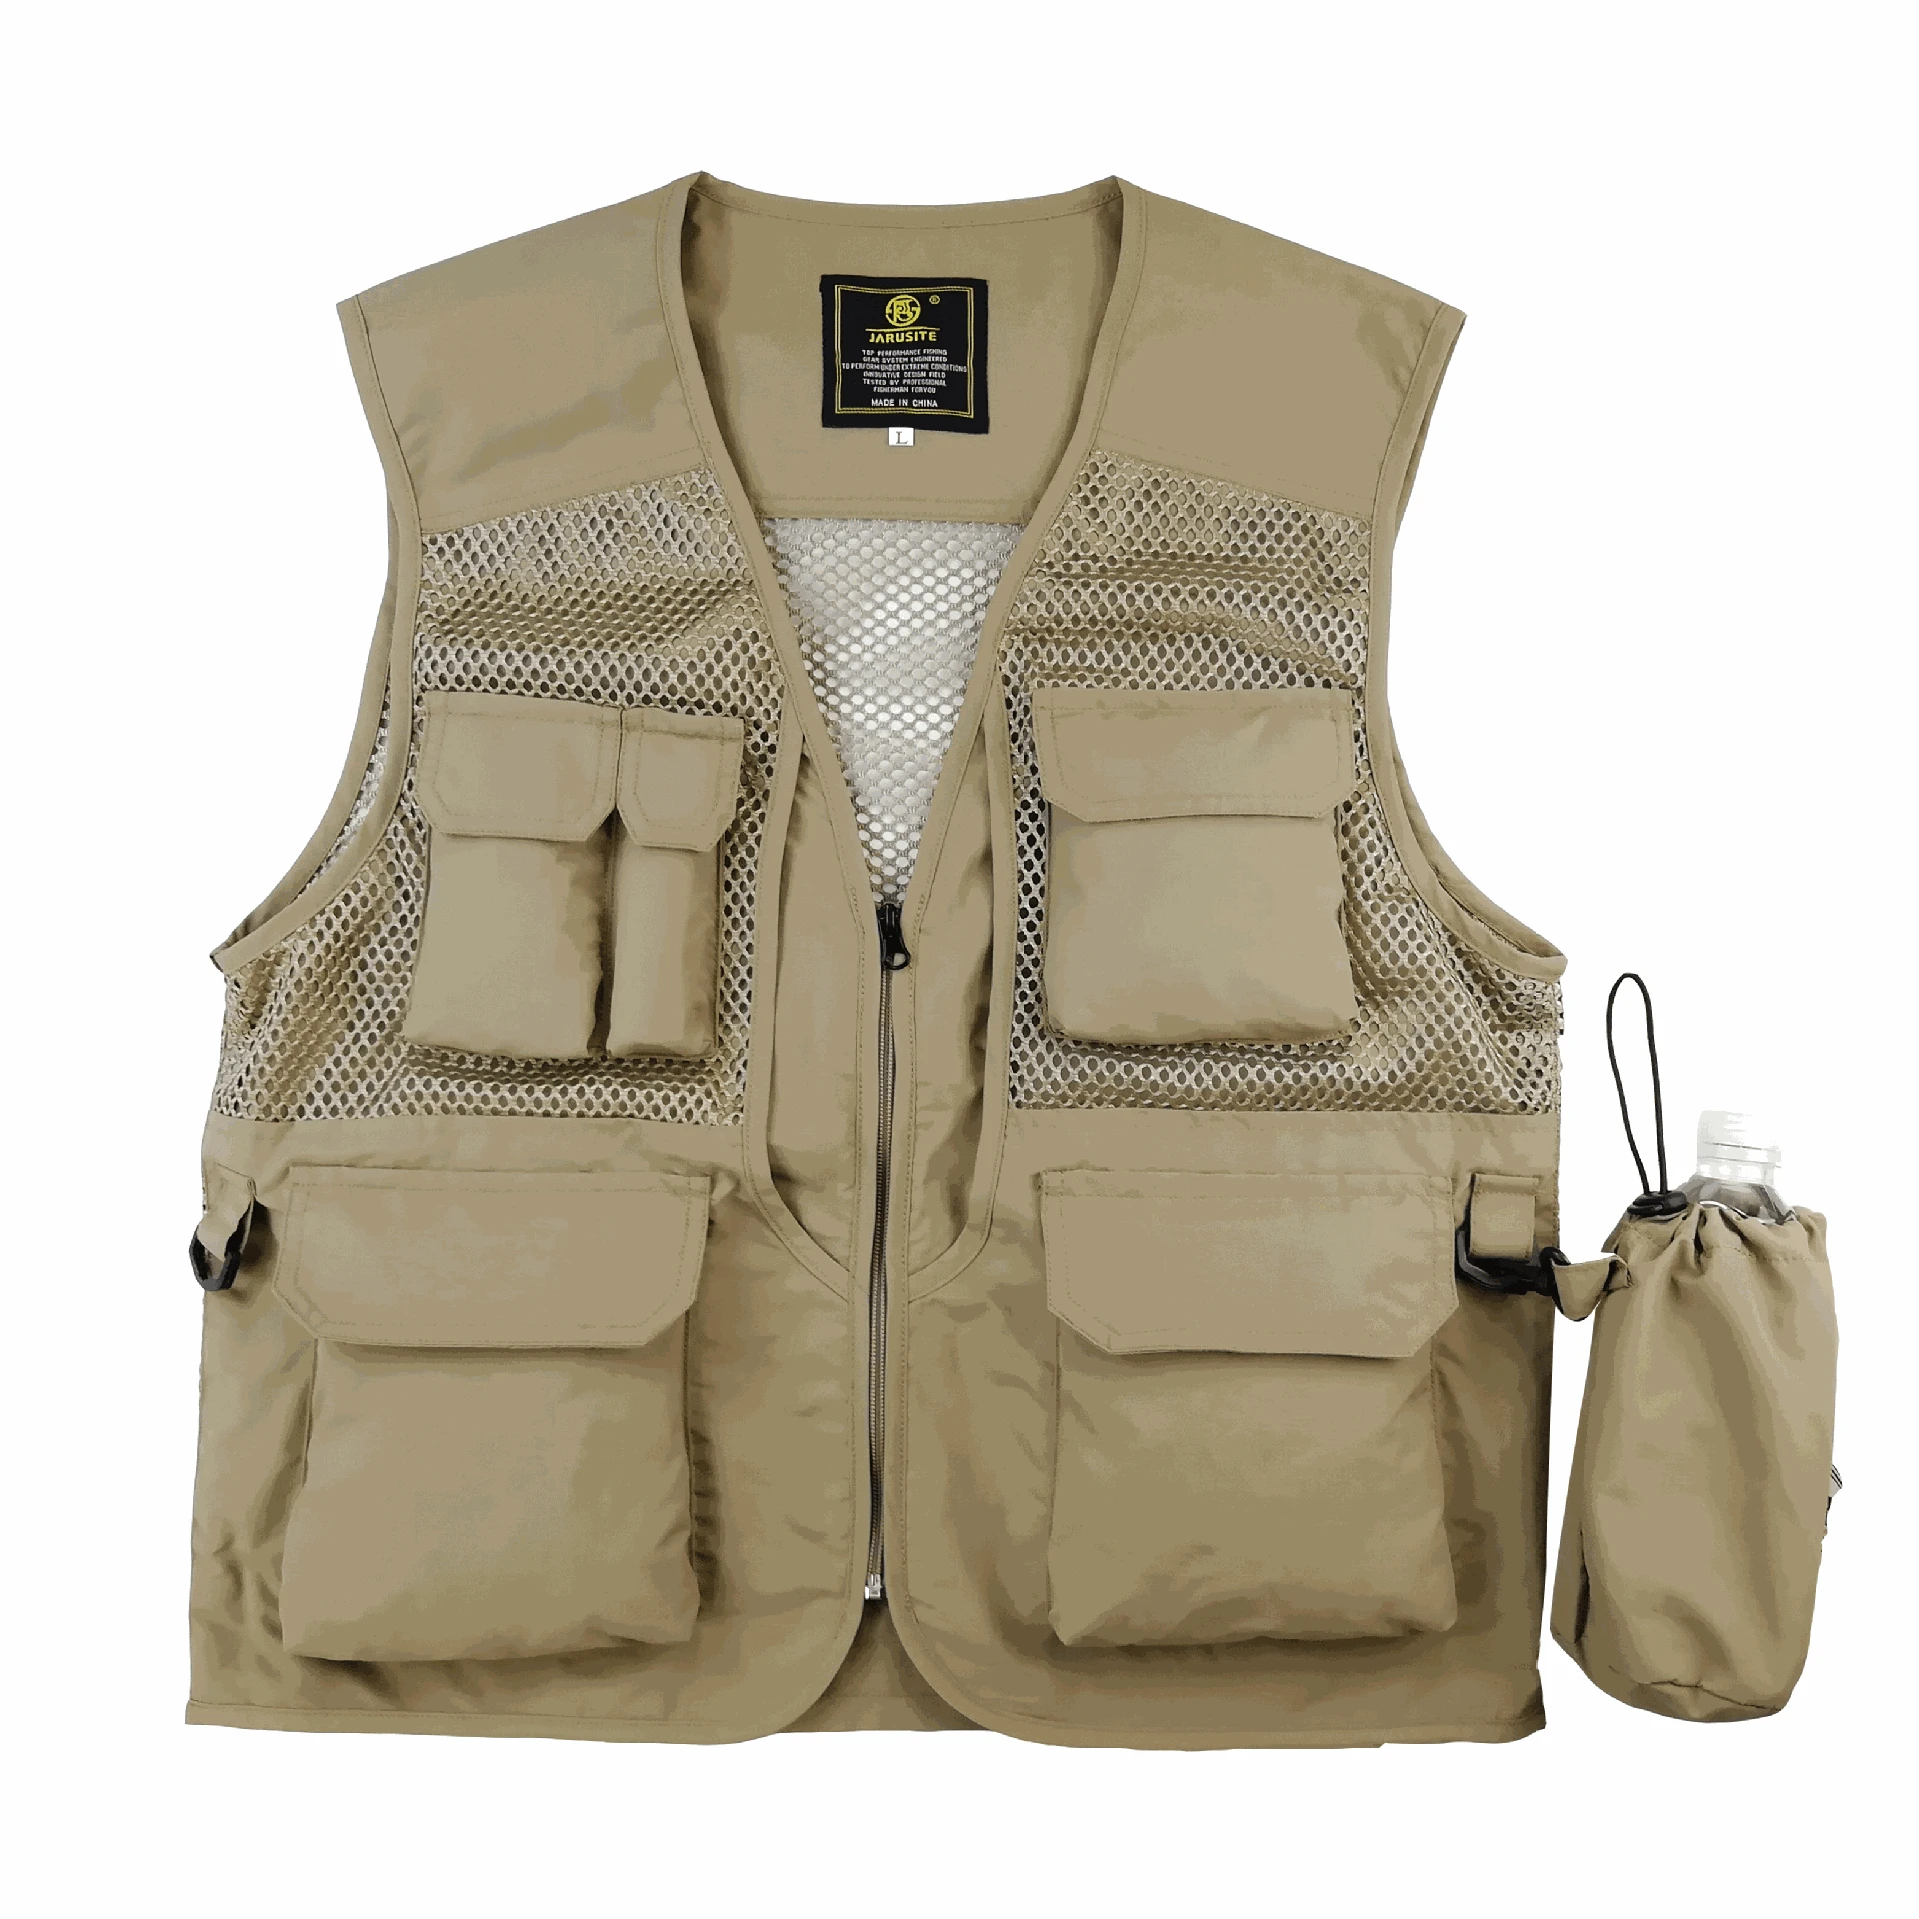 Mens Pockets Jacket Outdoors Travels Sports Photography Vest Tops 